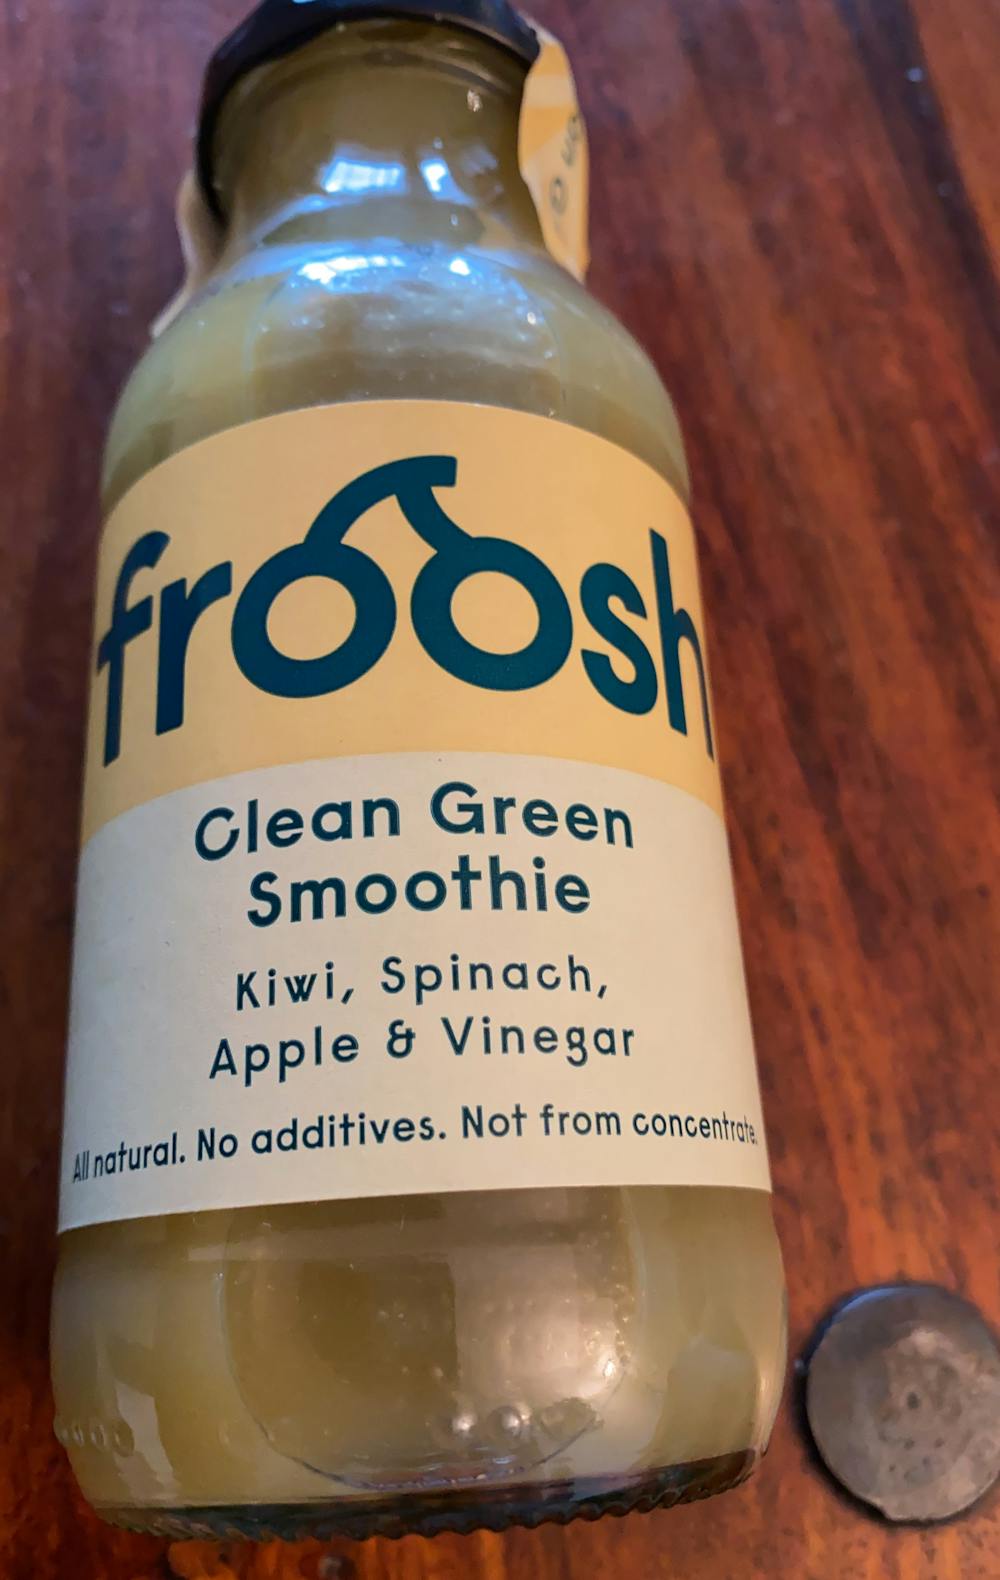 Clean green smoothie, Froosh